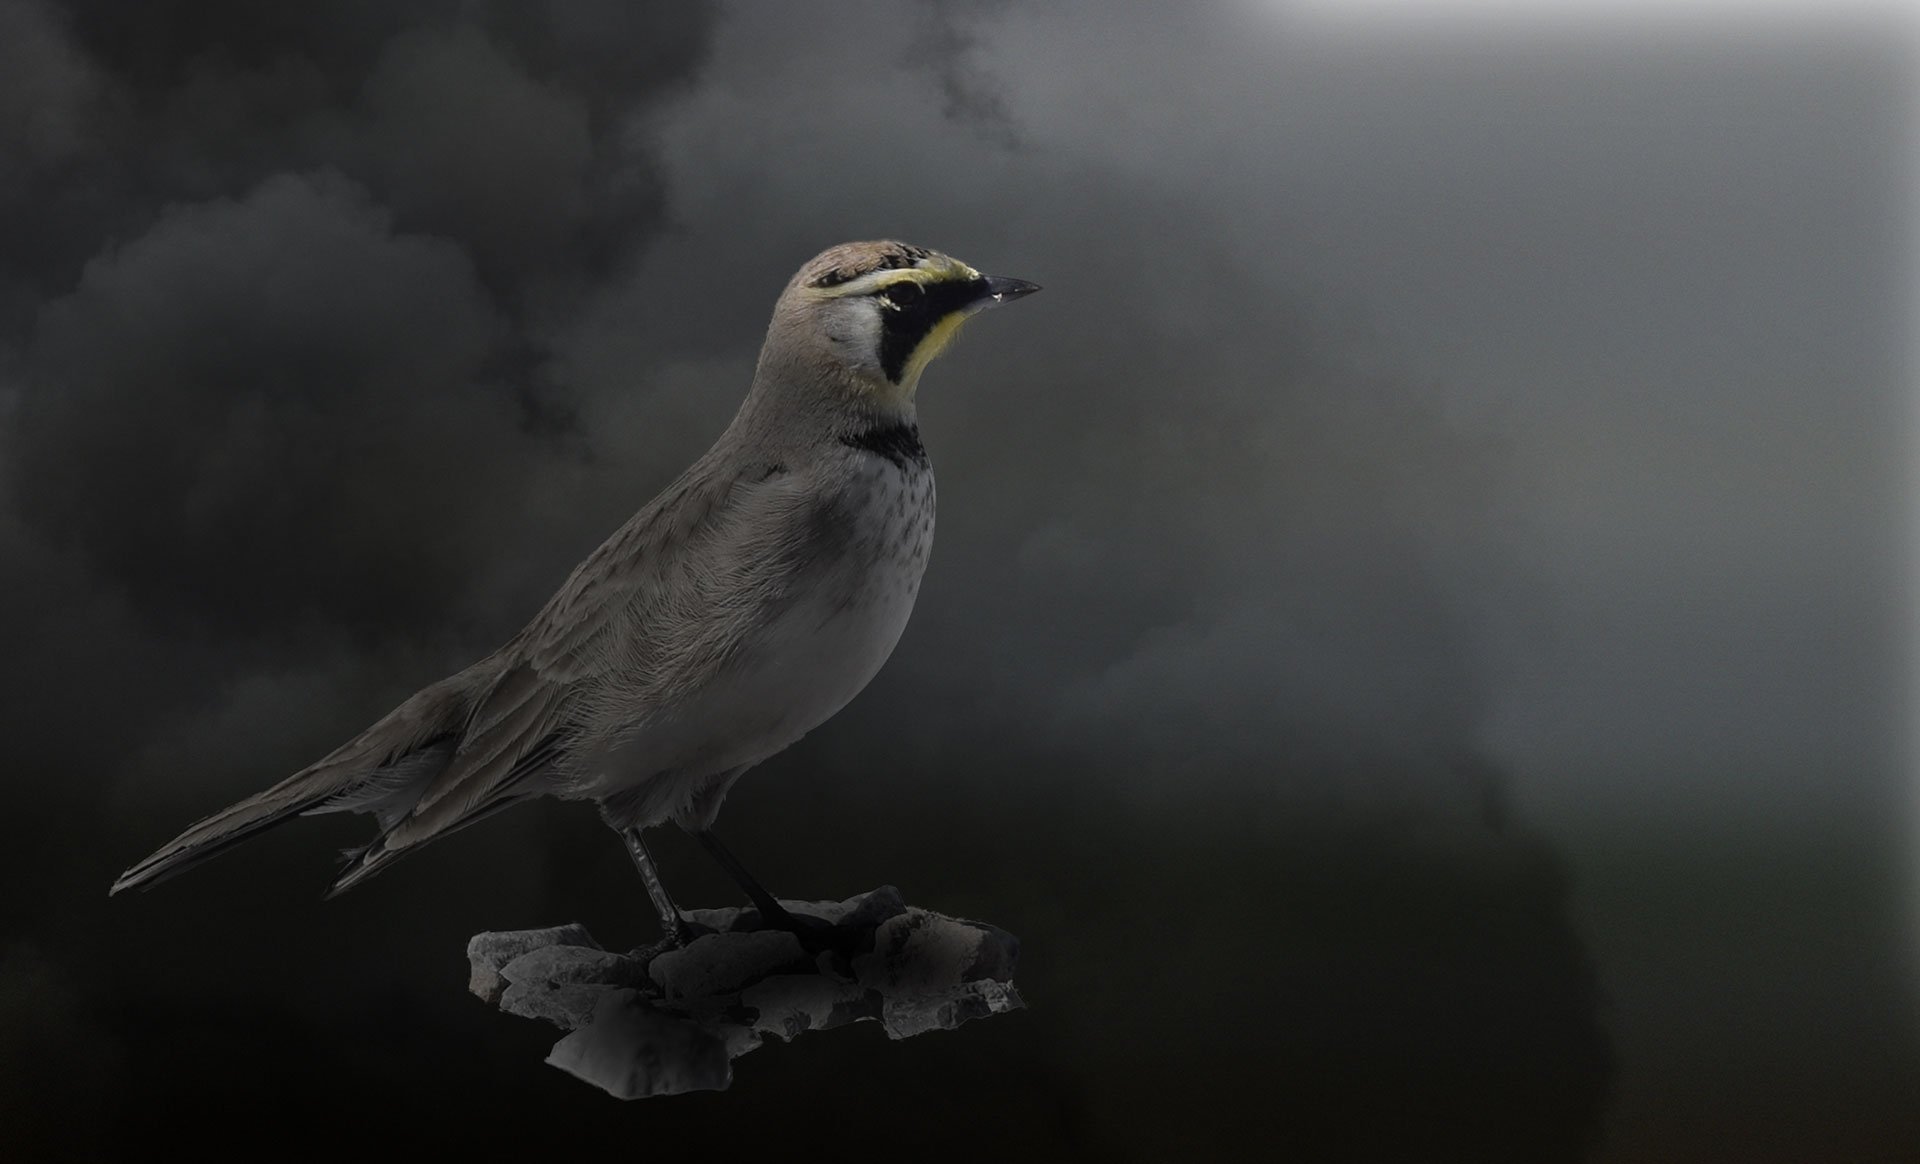 A lark stands amid smoke.